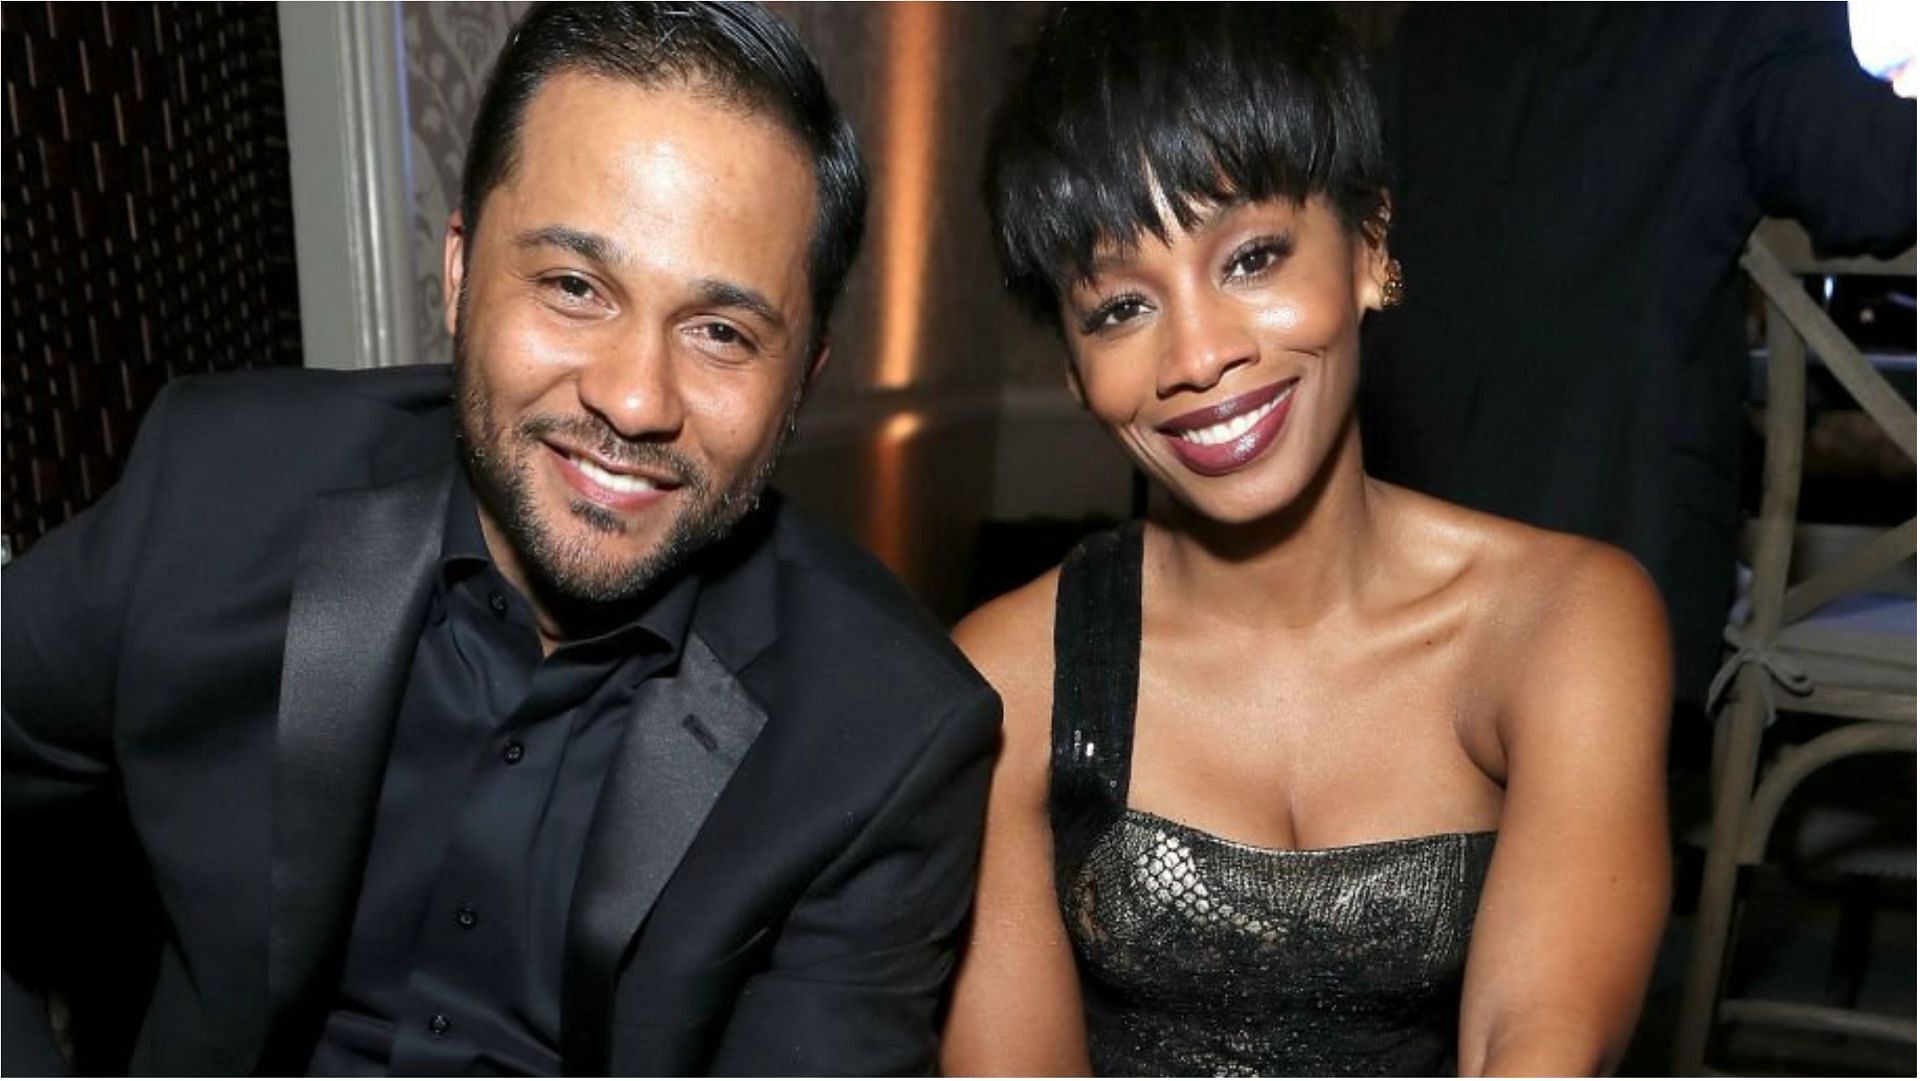 Anika Noni Rose and Jason Dirden got married last year (Image via Randy Shropshire/Getty Images)